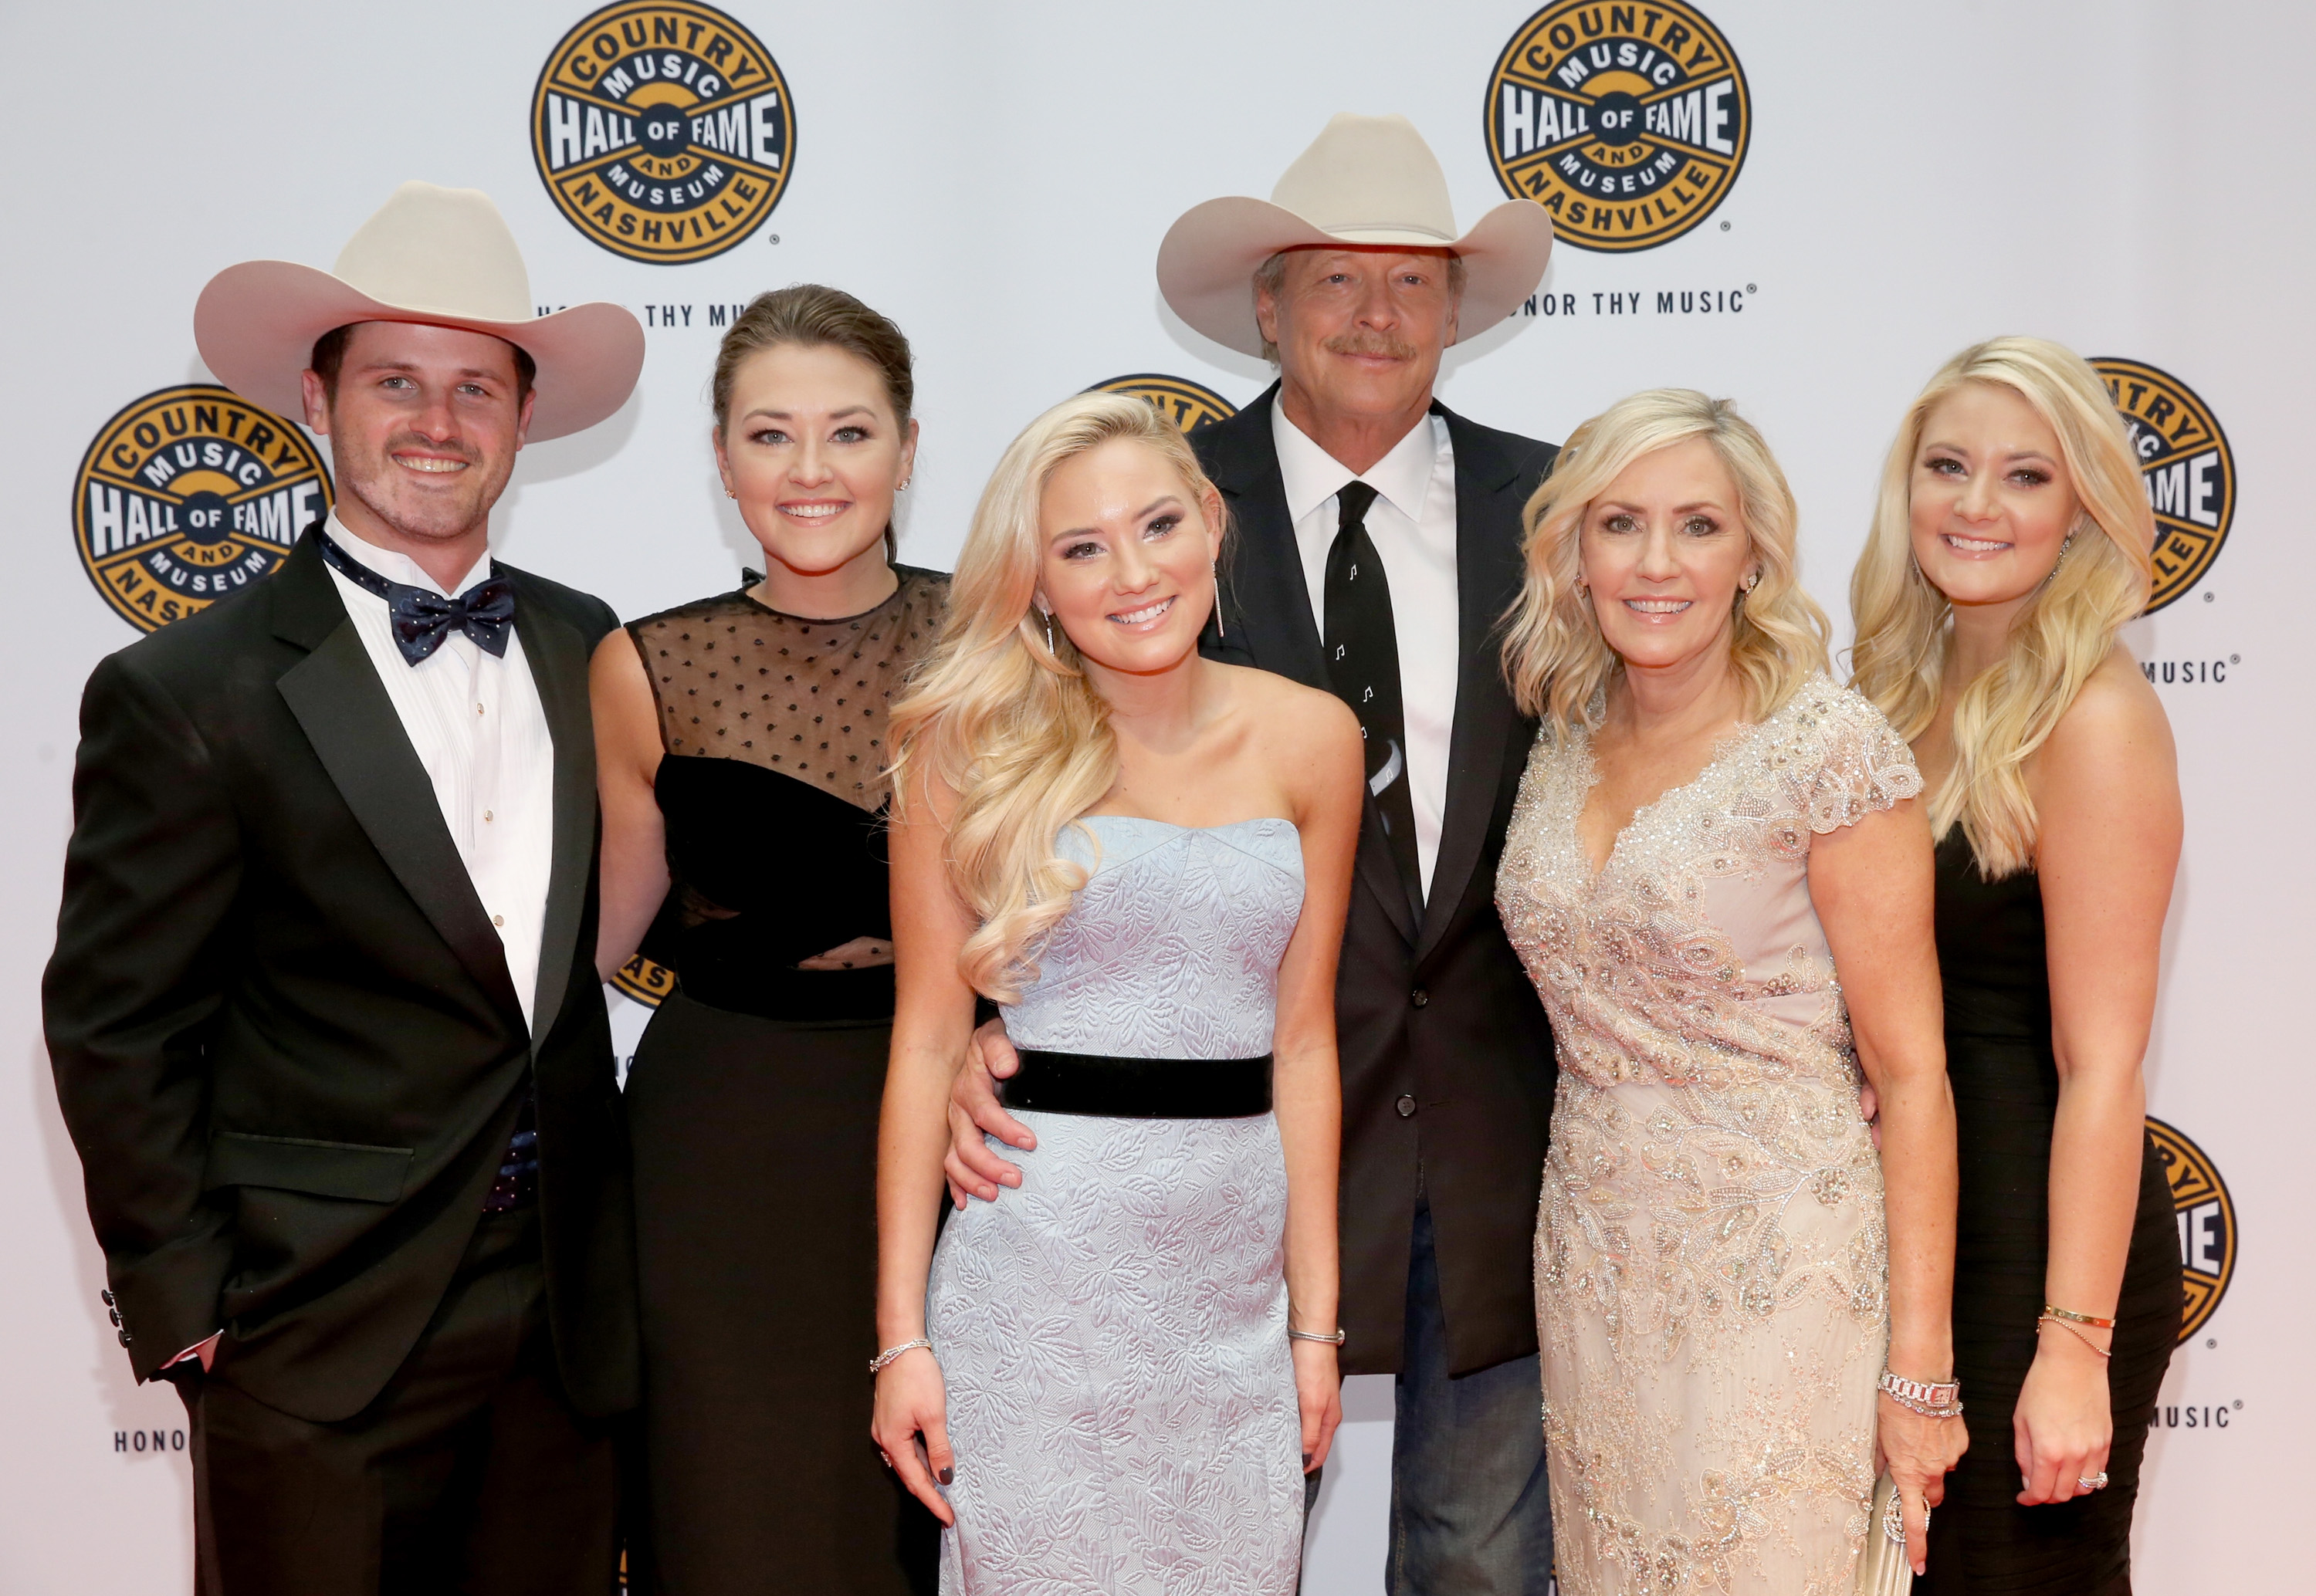 Ben Selecman, Mattie, Dani, Alan, Denise, and Alexandra Jackson attend the Country Music Hall of Fame on October 22, 2017 in Nashville, Tennessee | Source: Getty Images